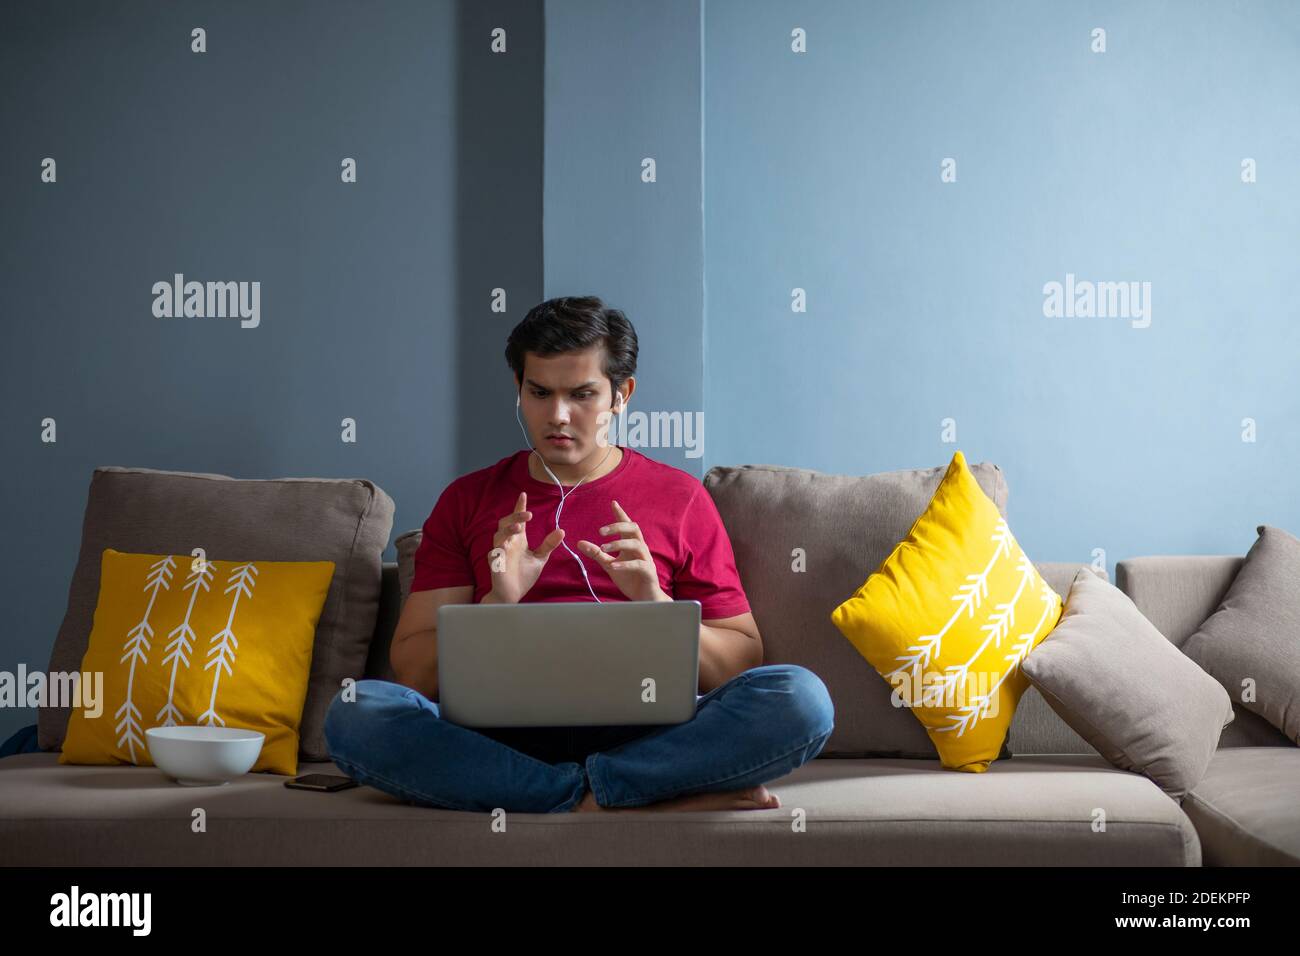 YOUNG COLLEGE STUDENT GETTING HIS DOUBTS CLEARED IN DURING ONLINE CLASS SESSION Stock Photo